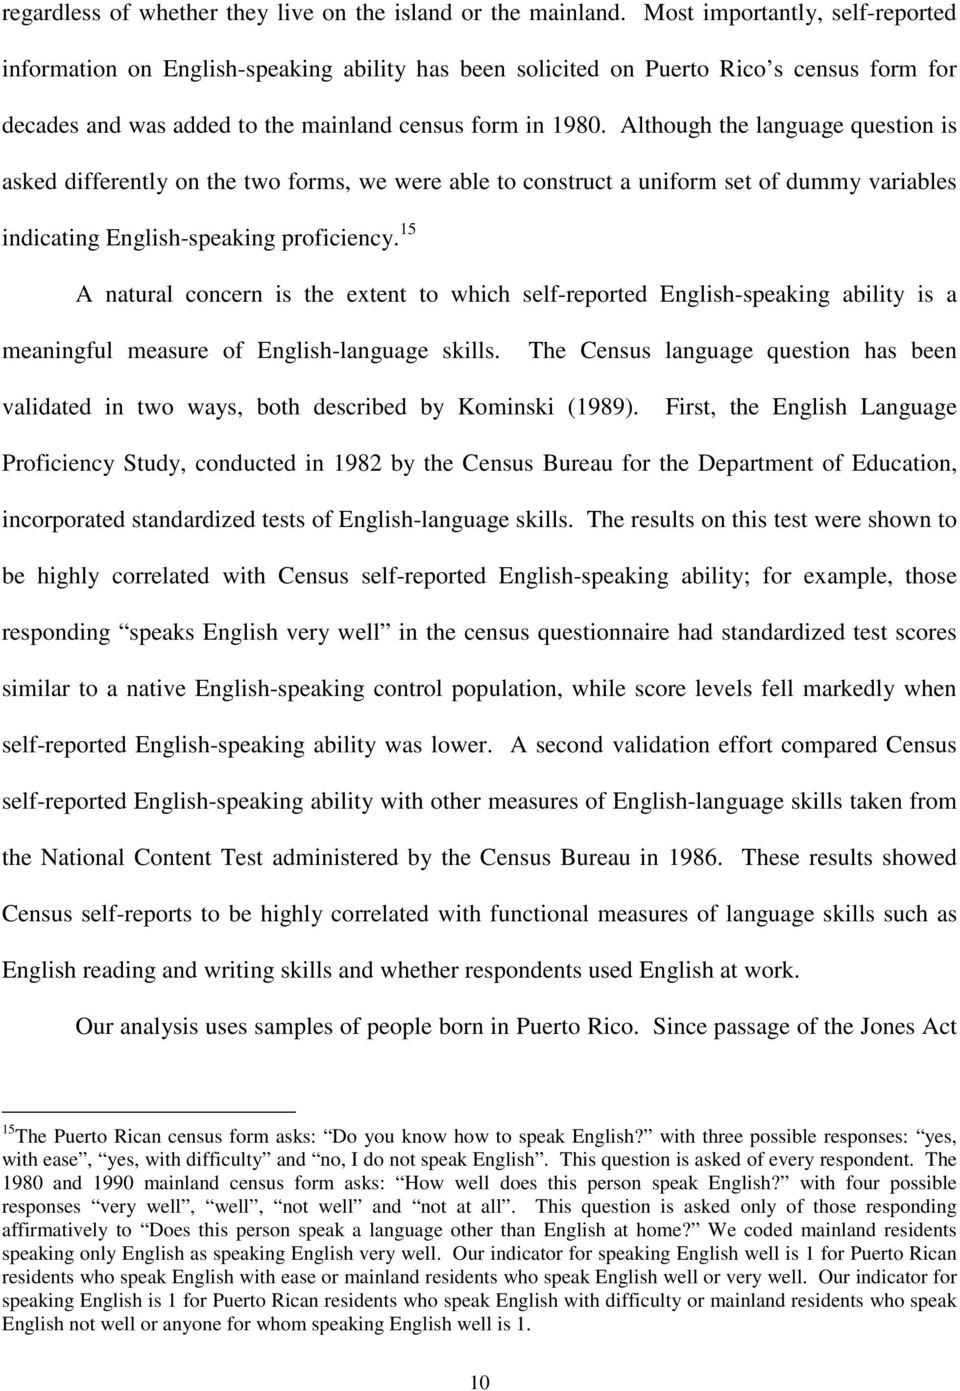 Although the language question is asked differently on the two forms, we were able to construct a uniform set of dummy variables indicating English-speaking proficiency.